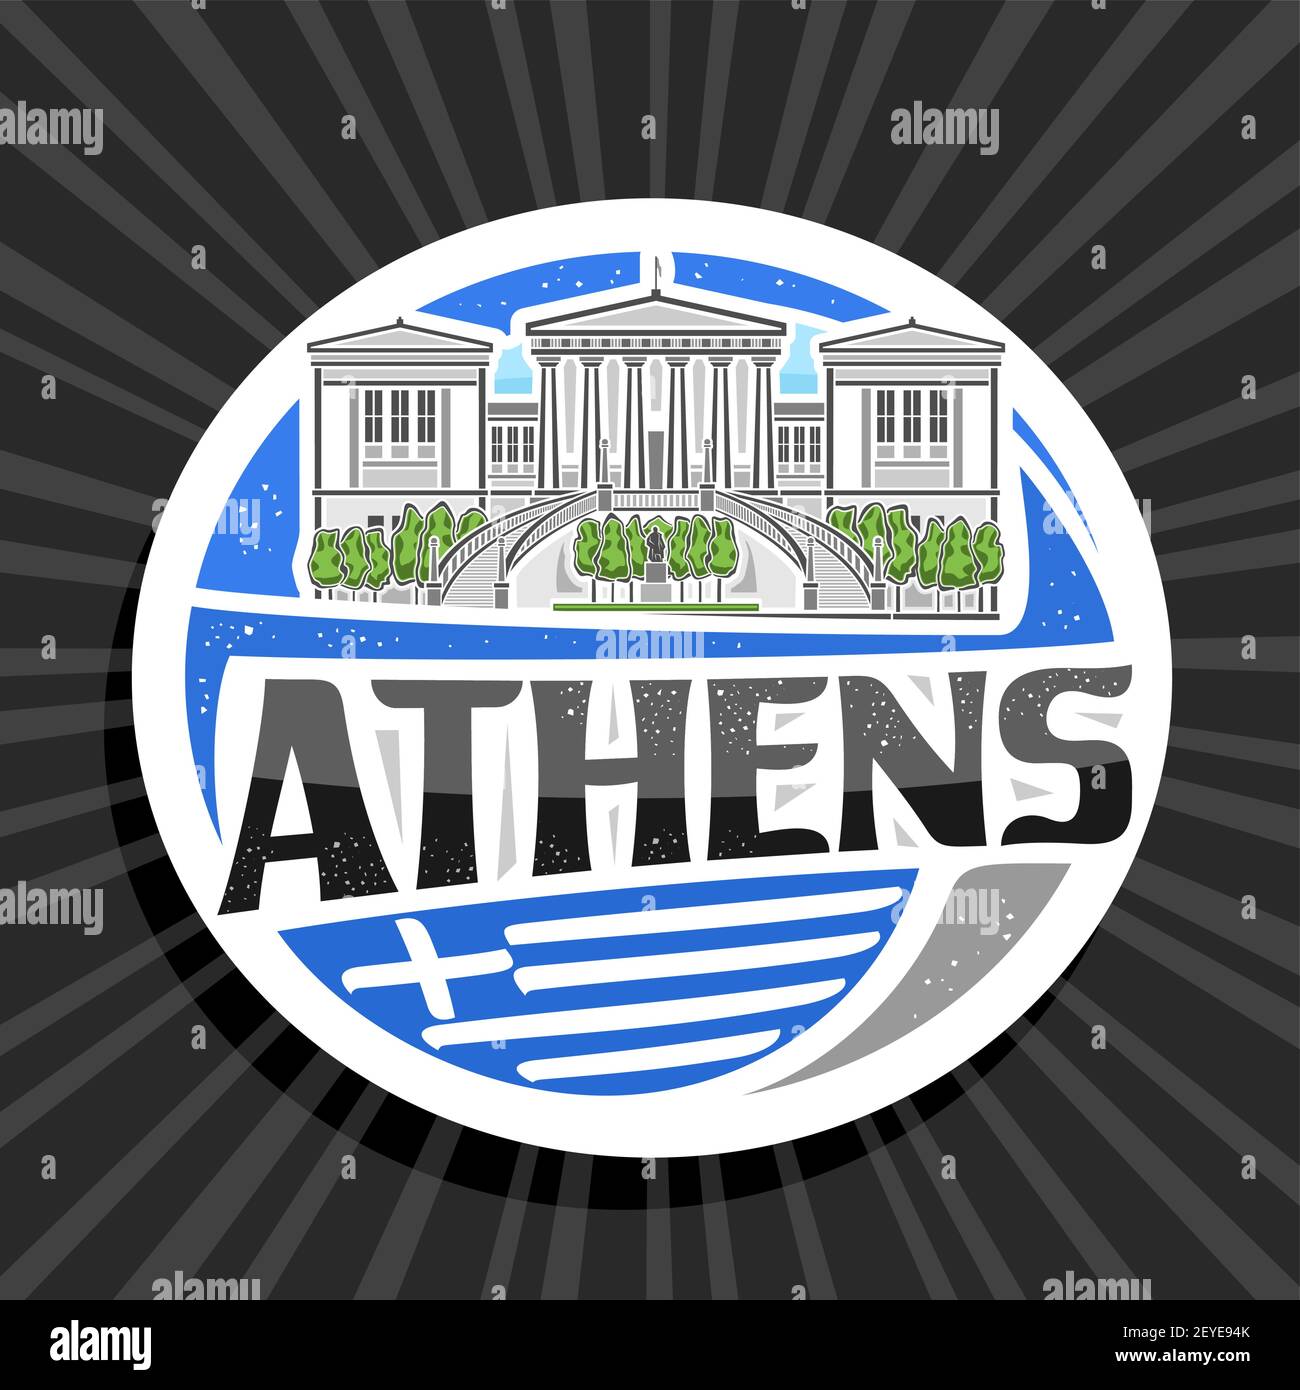 Vector logo for Athens, white decorative badge with line illustration of national library of greece on day sky background, art design tourist fridge m Stock Vector